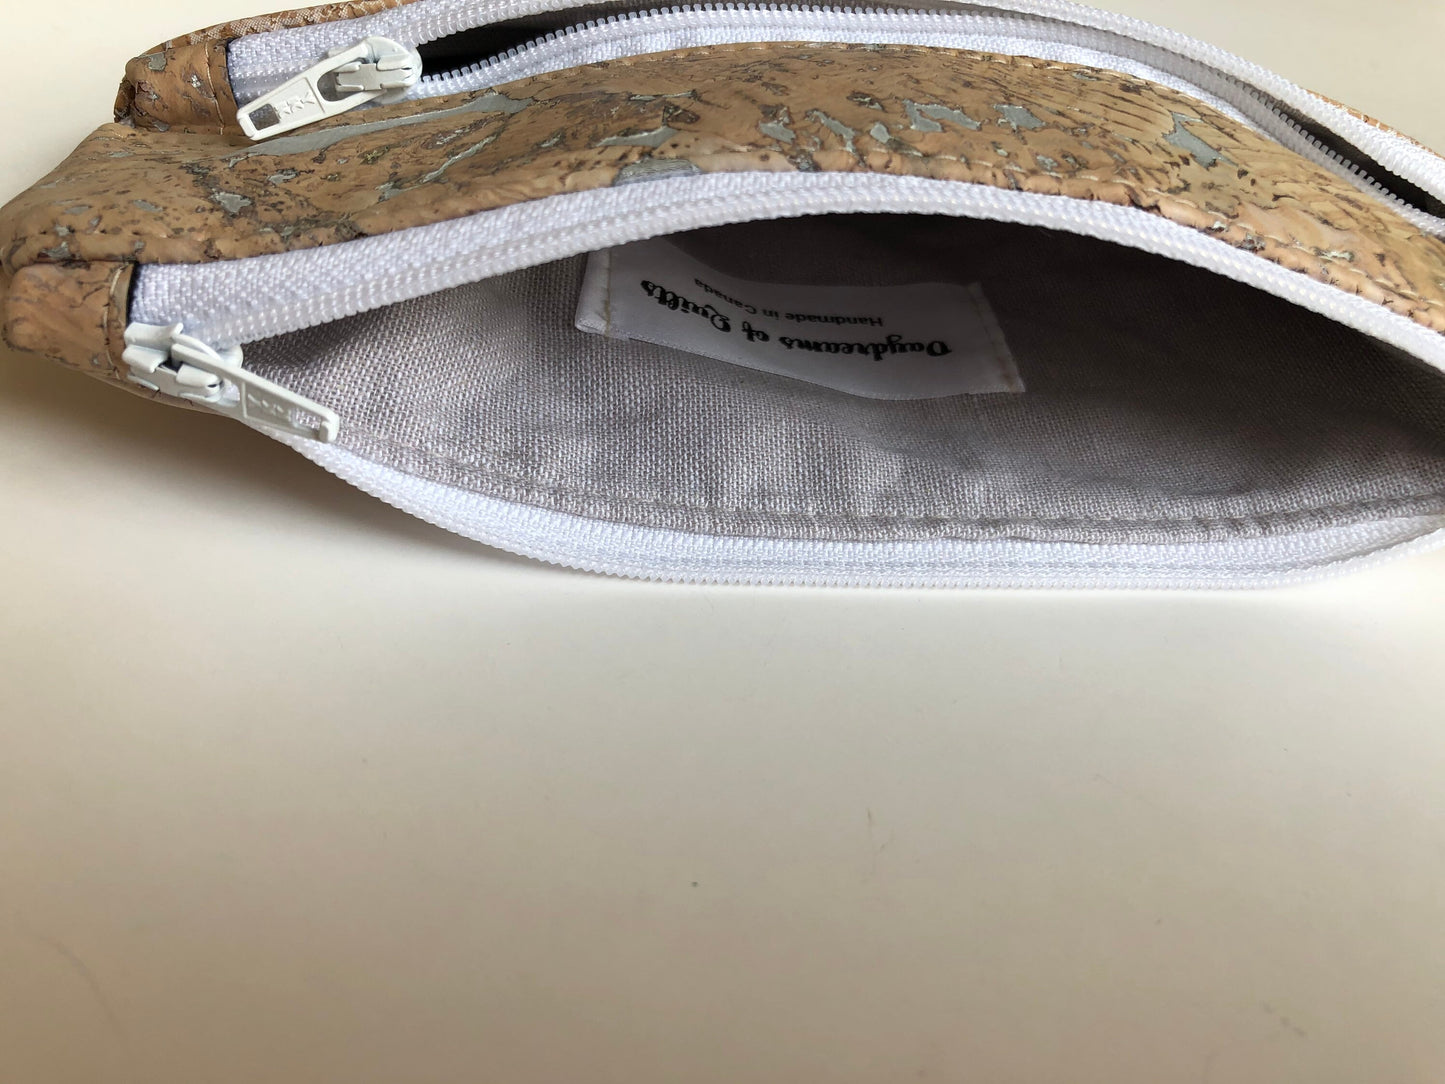 Double Zip Wristlet Pouch White and Natural Cork